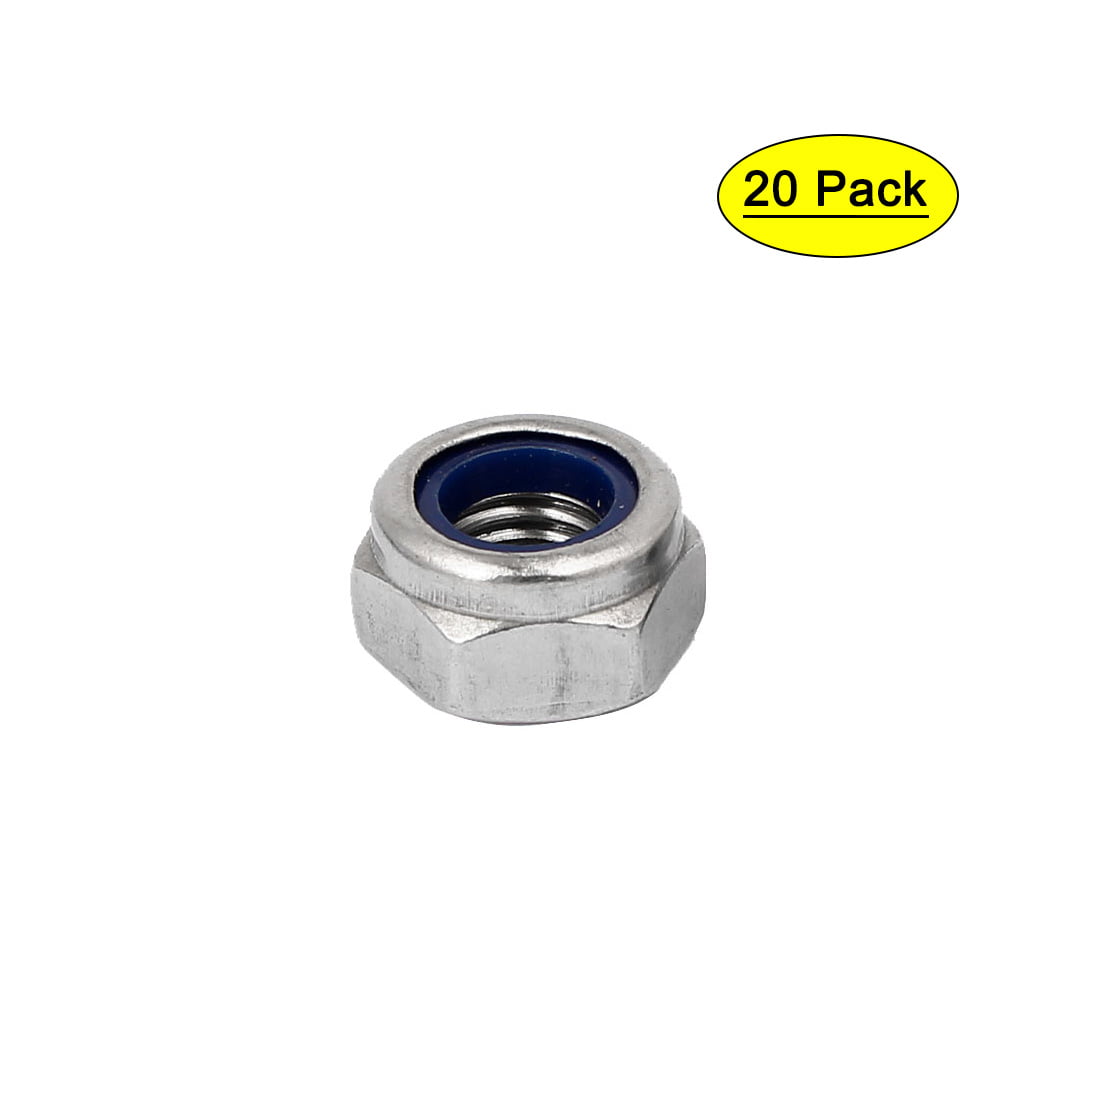 corrosion resistant Qty 25 1/2" 13 Nylock Brass nuts engine mounting nuts 